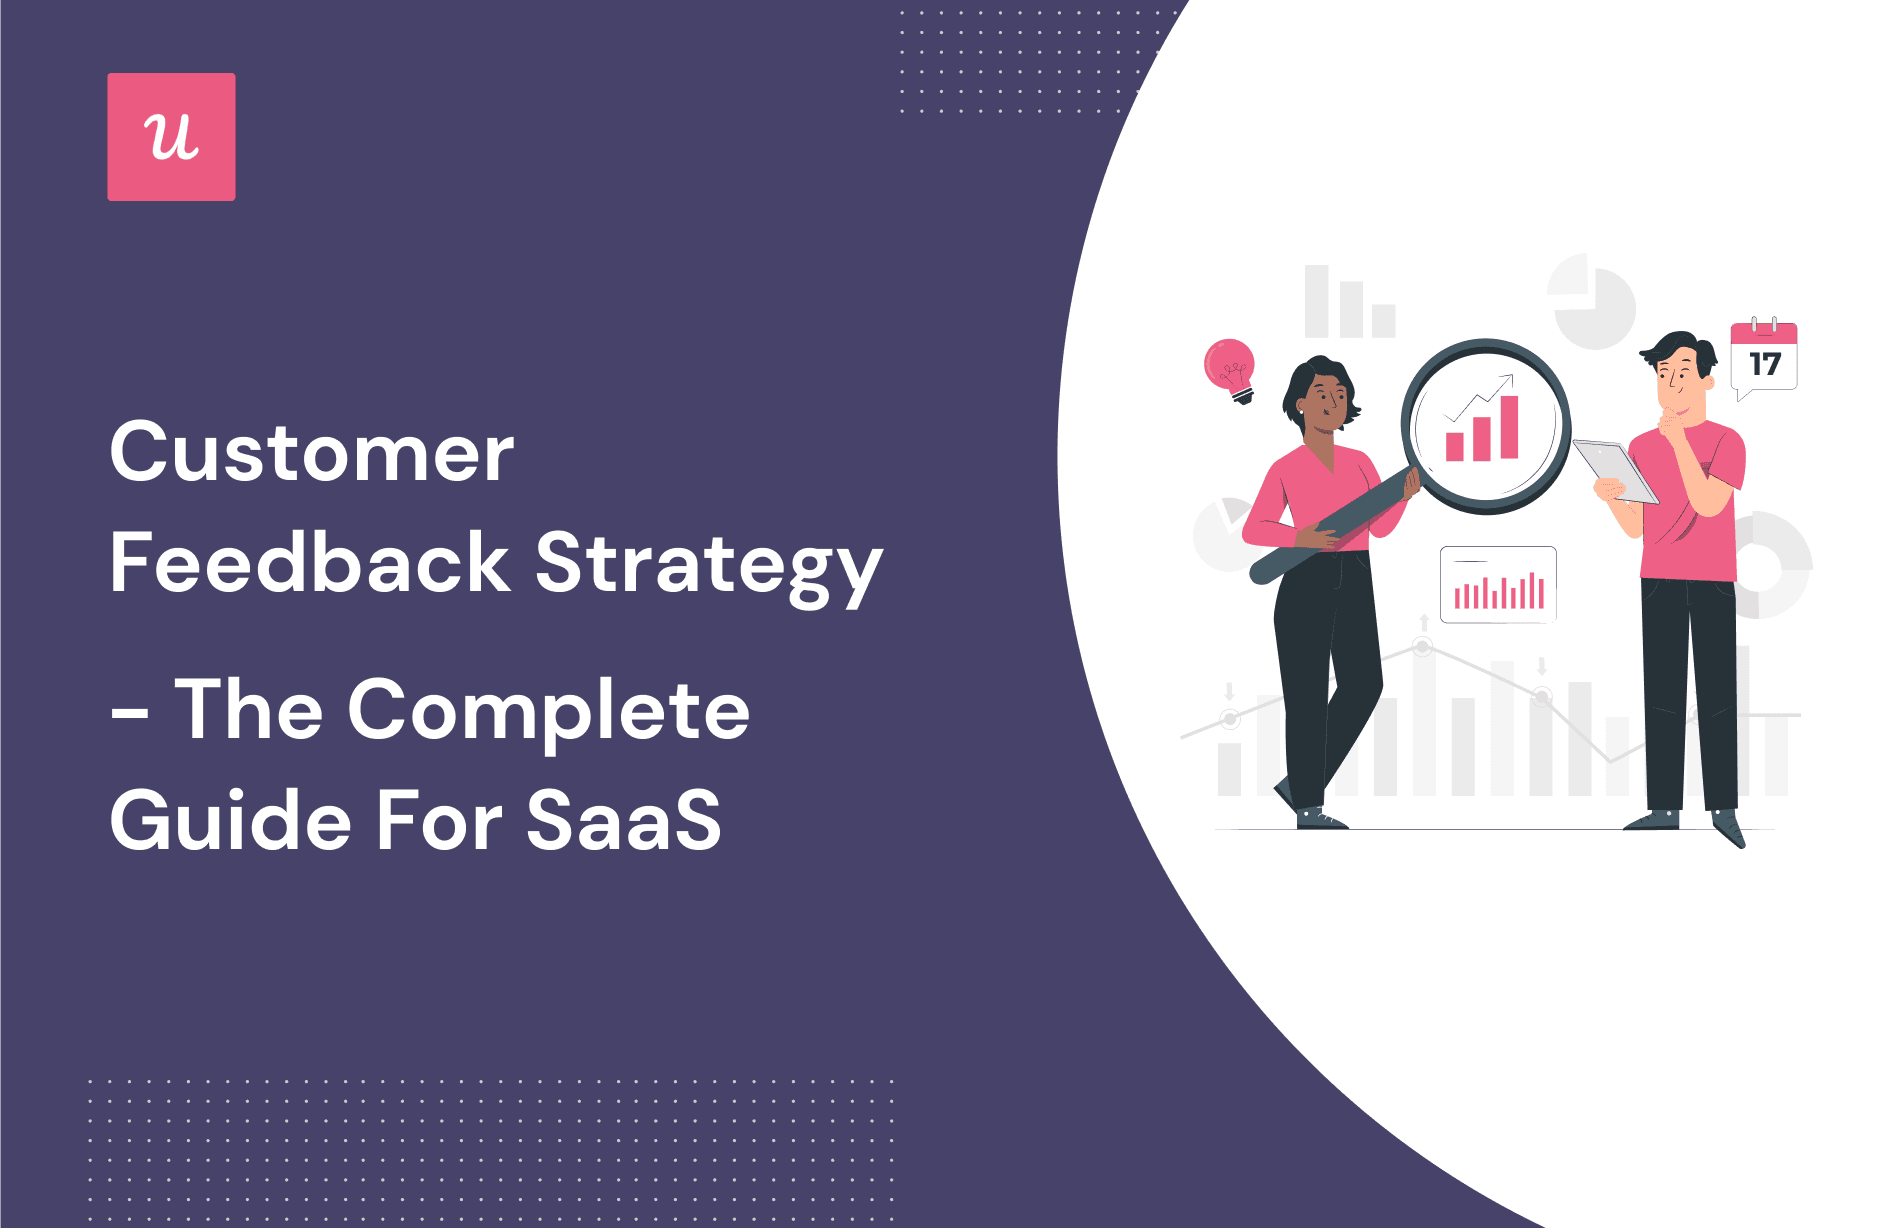 Customer Feedback Strategy - The Complete Guide For SaaS cover